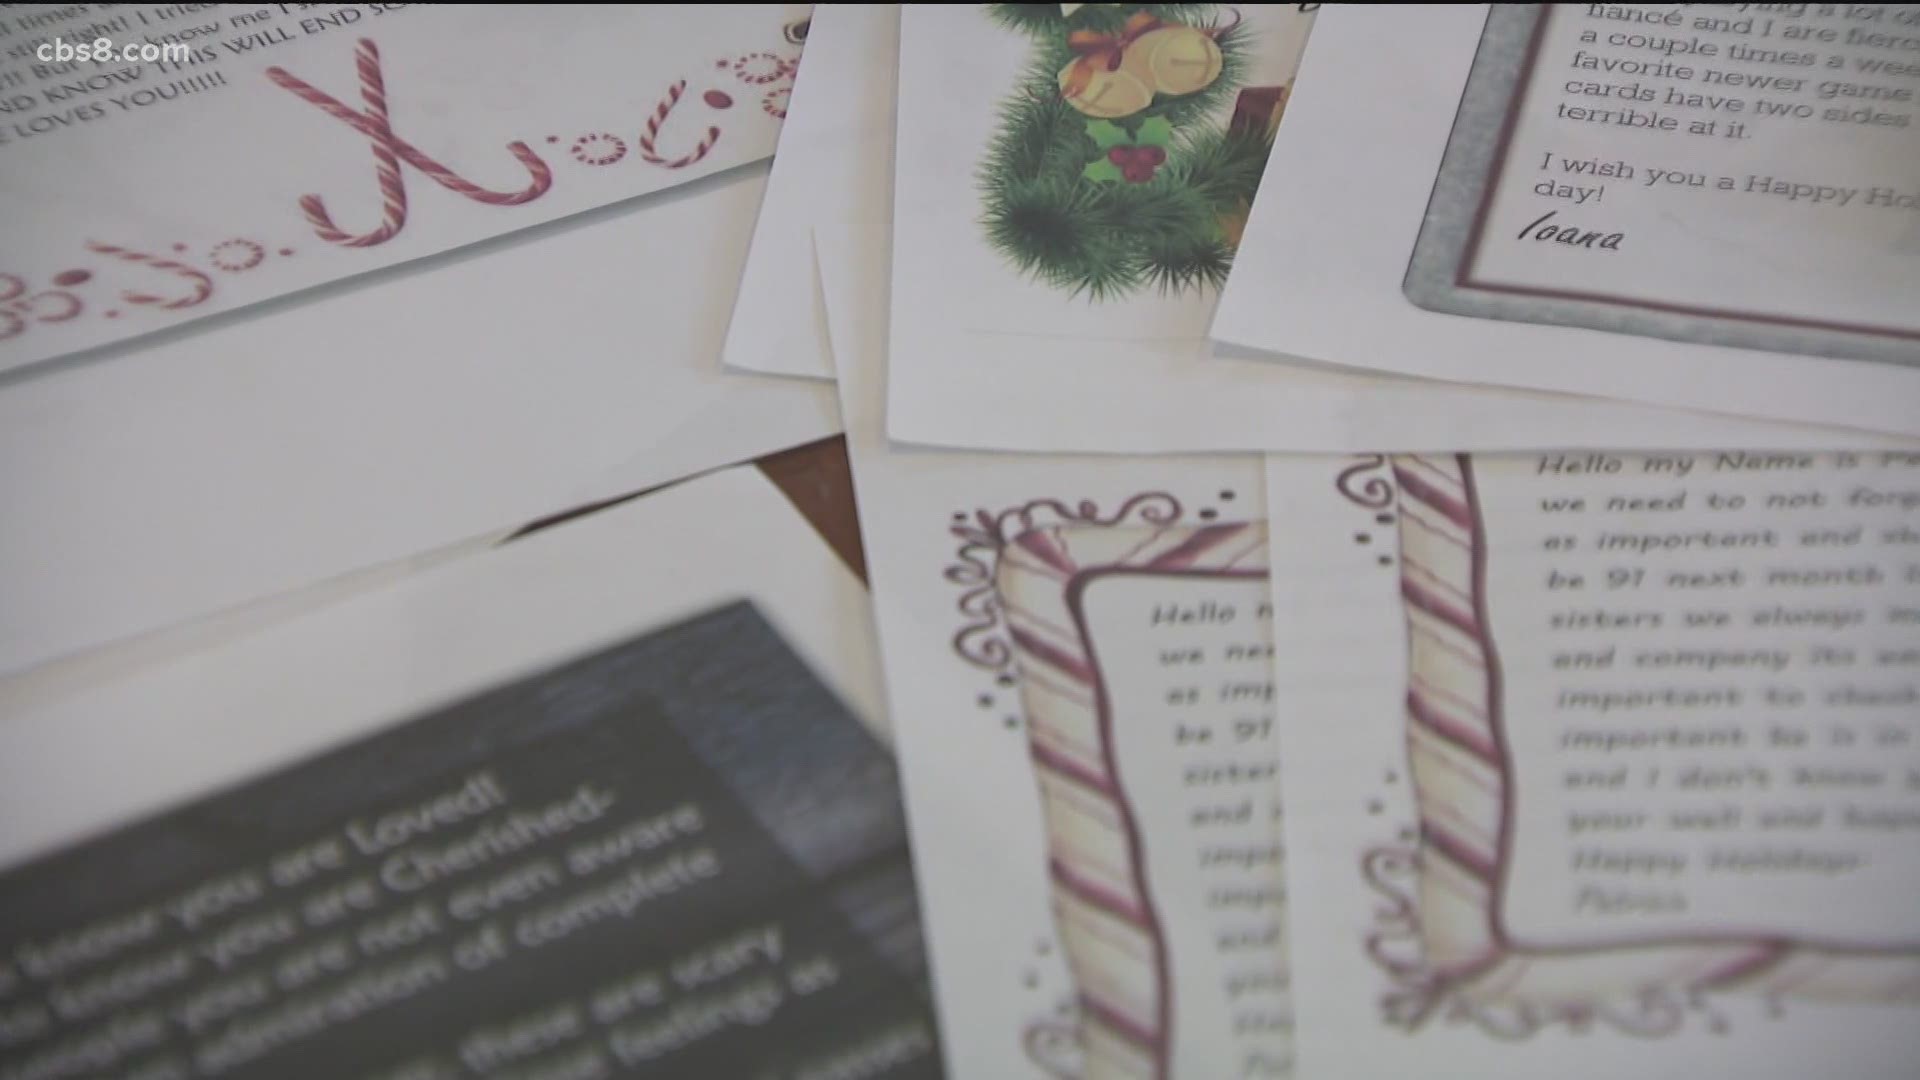 Thanks to the efforts of our News 8 audience, over 100 letters were delivered to seniors in San Diego communities.